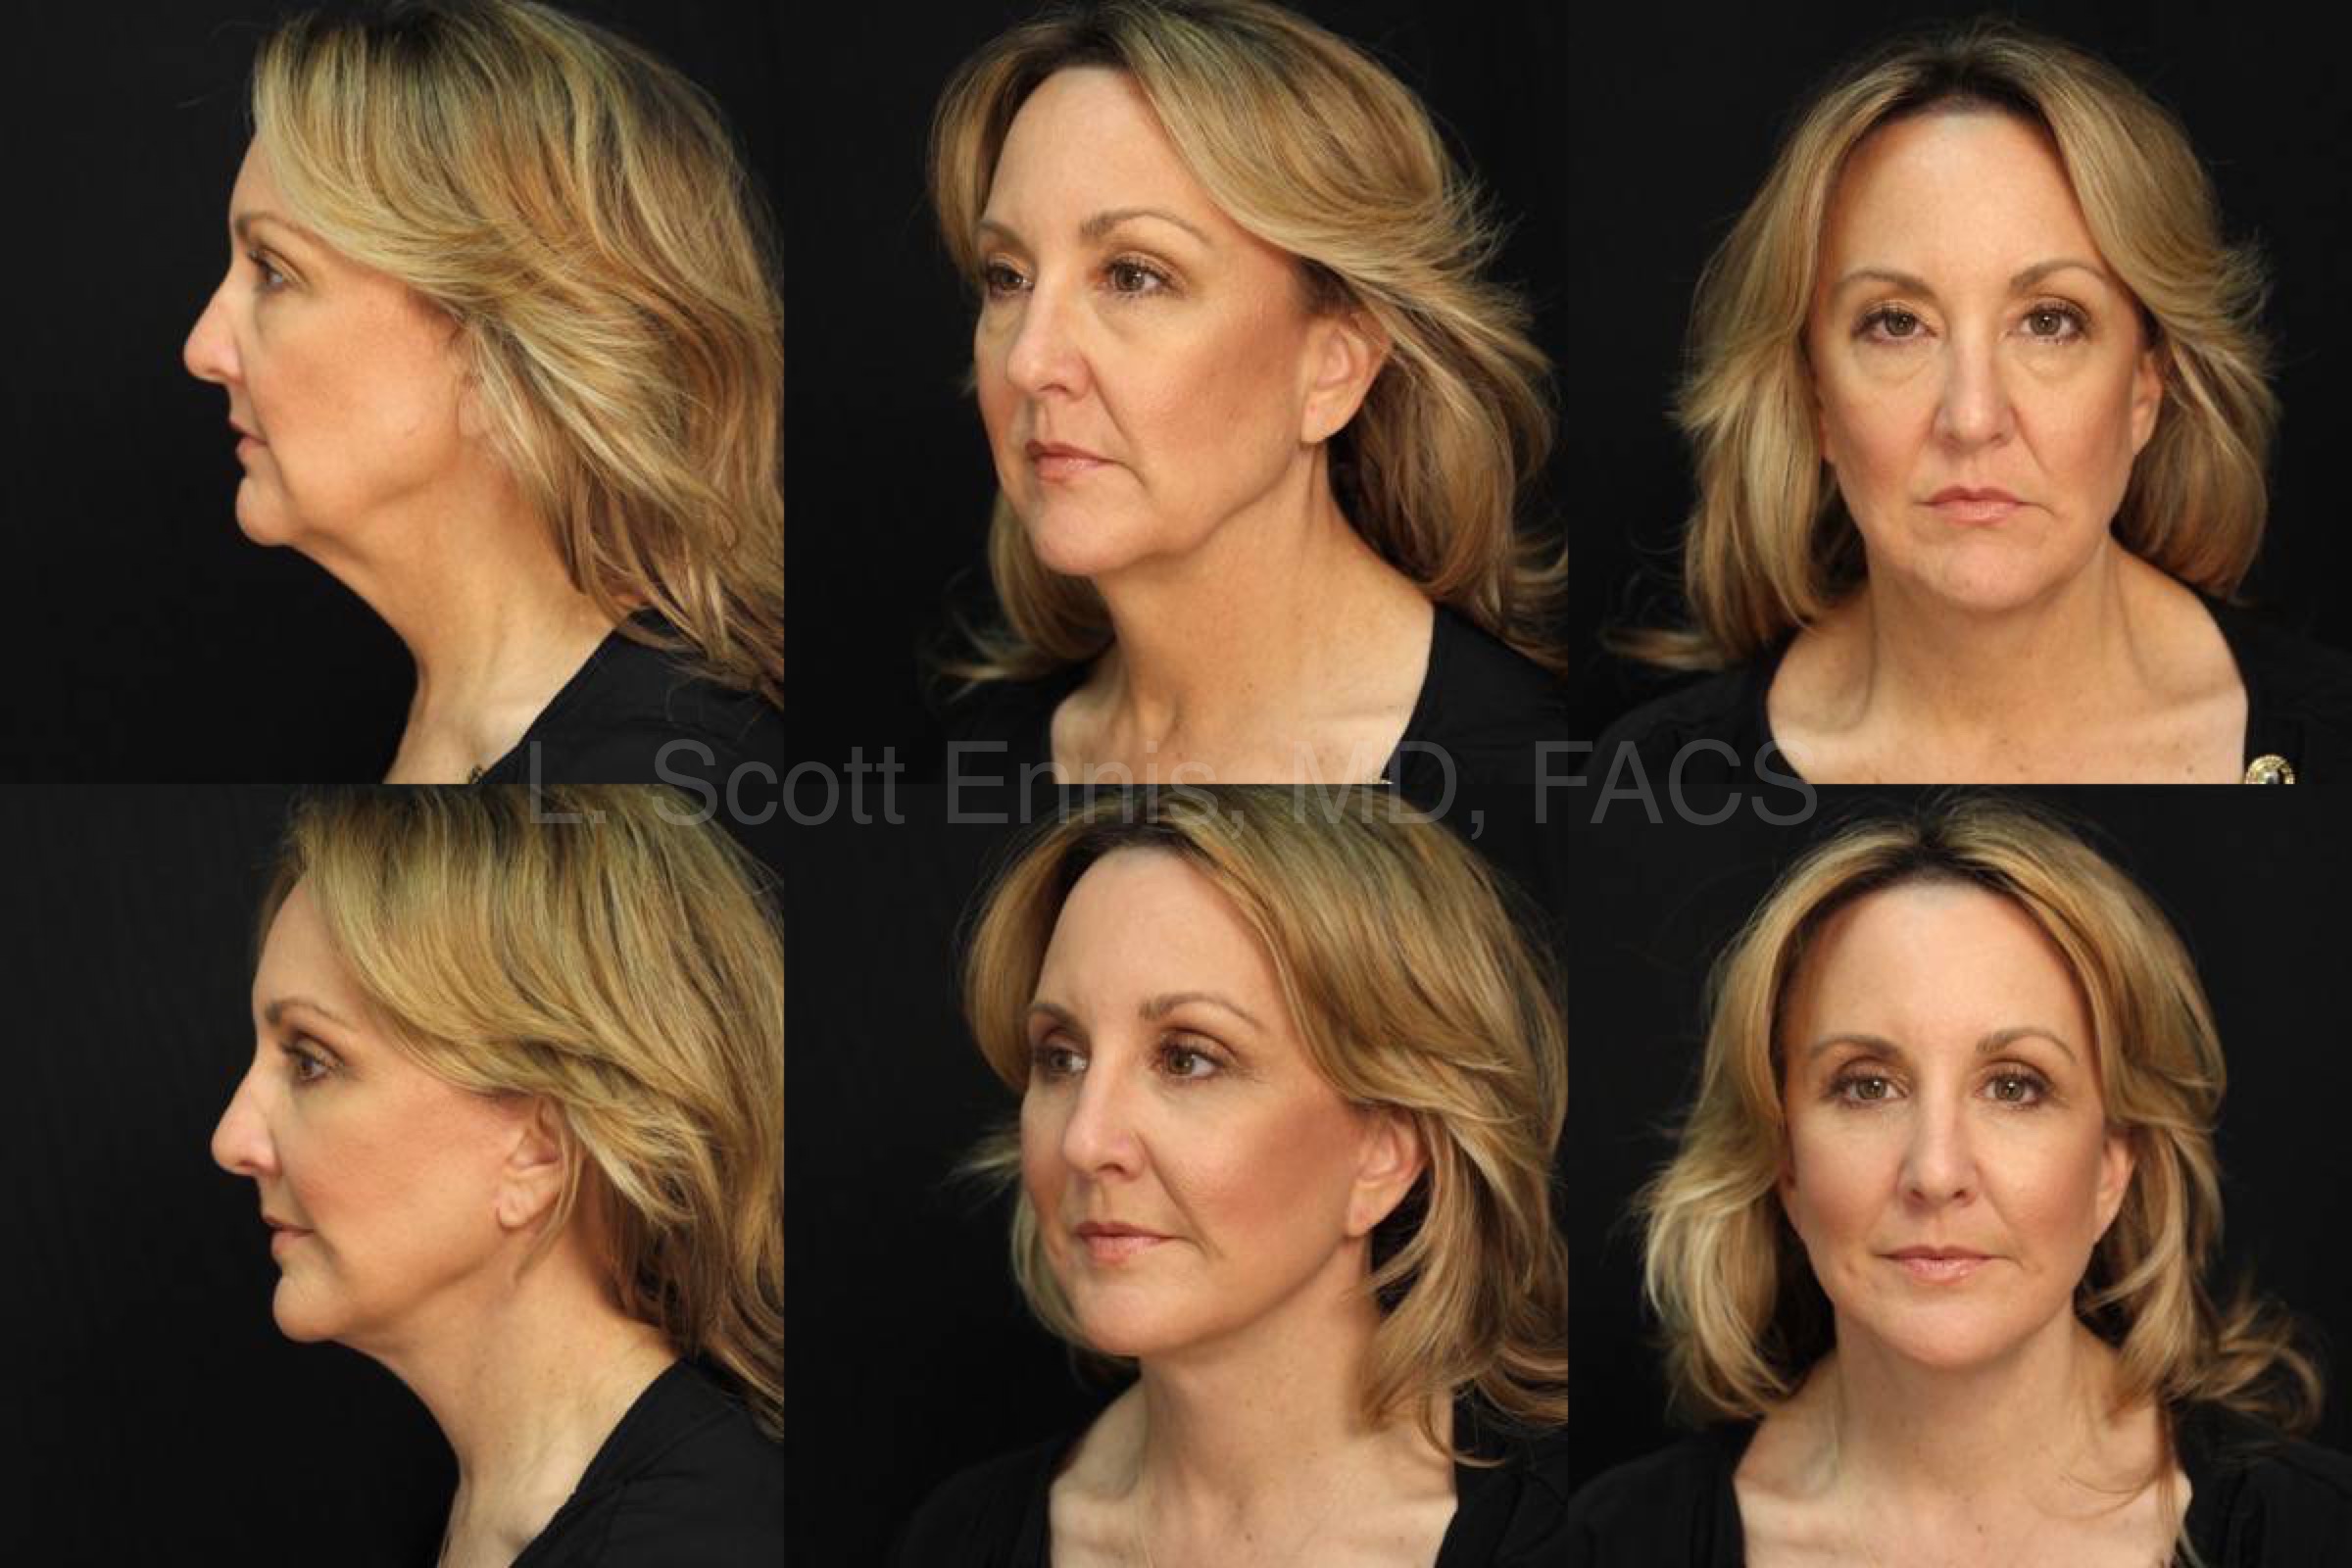 Before and After face lift eye lid lift blepheroplasty buccal fat pad removal mini Ennis Plastic Surgery Palm Beach Boca Raton Destin Miami Fort Lauderdale Florida